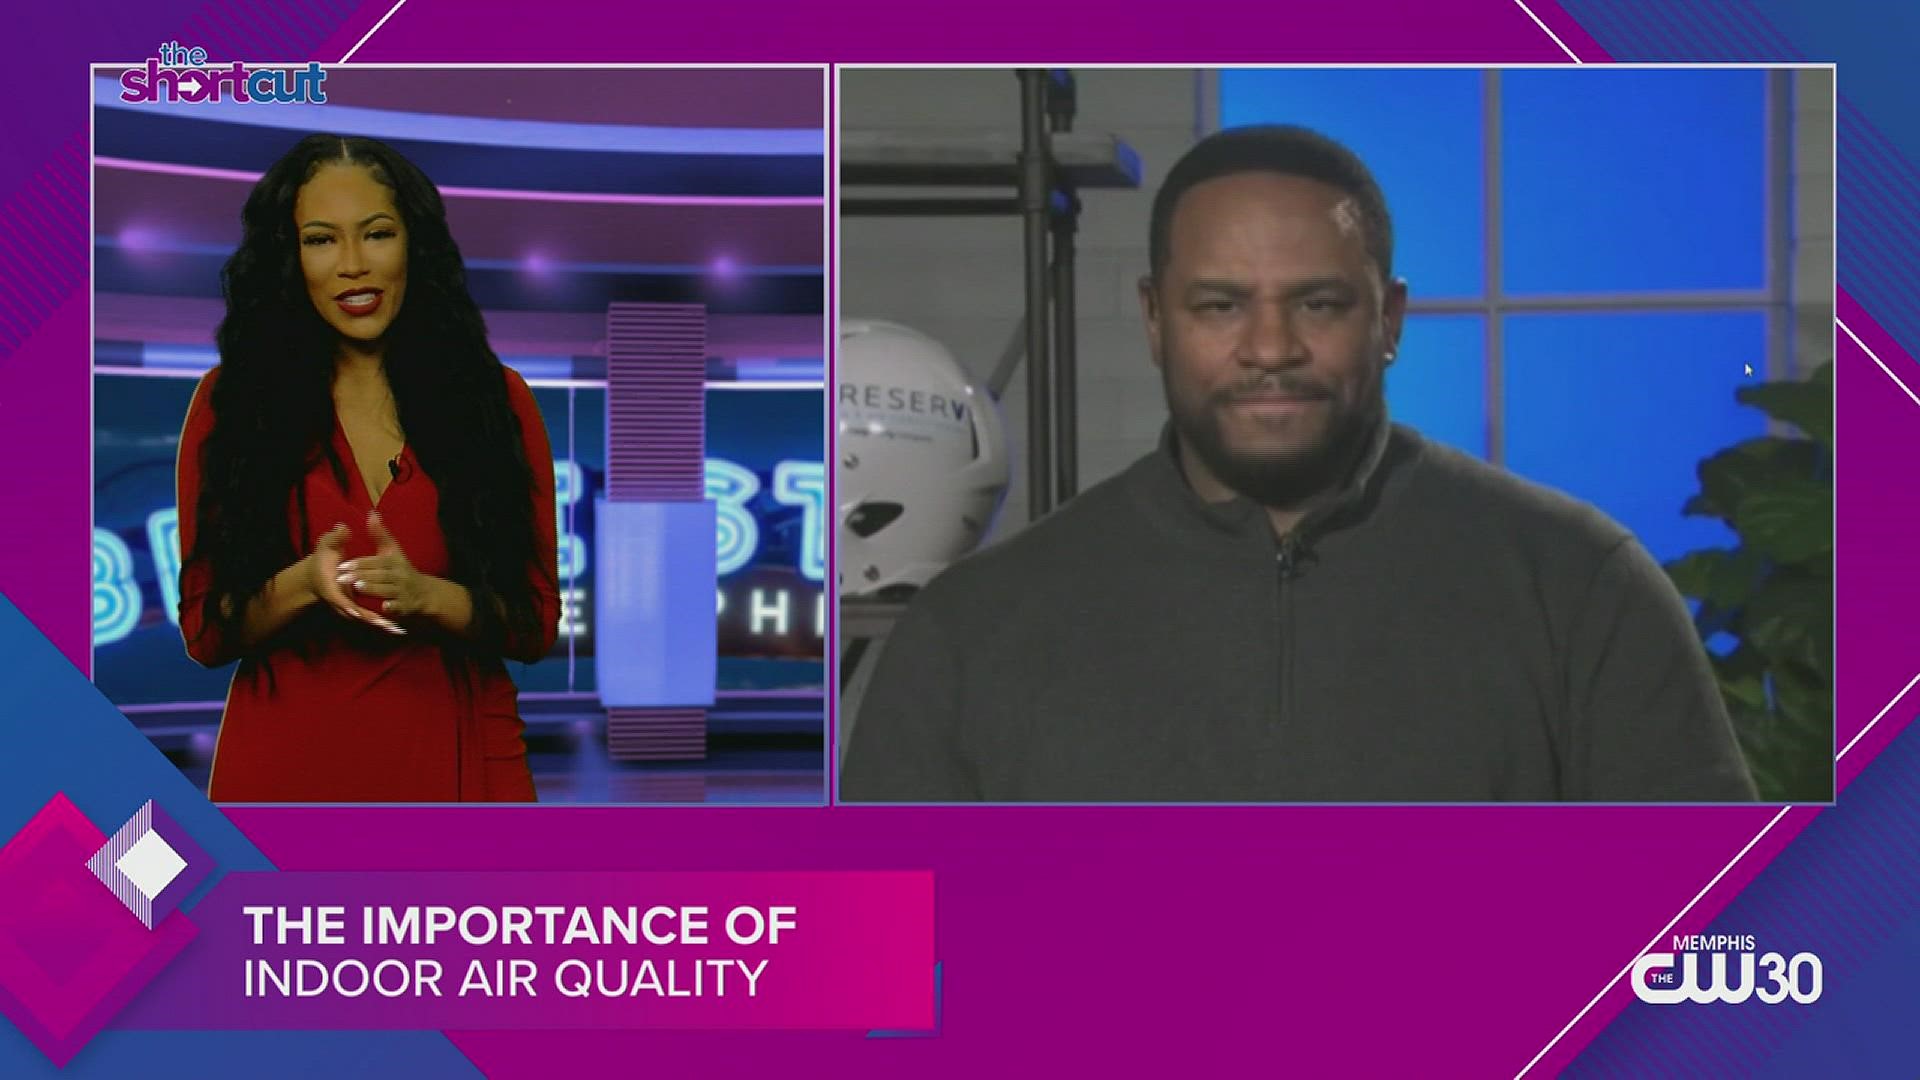 Join lifestyle host Sydney Neely and hall of fame and Super Bowl winning running back Jerome Bettis for an insight into how indoor air quality affects our health!